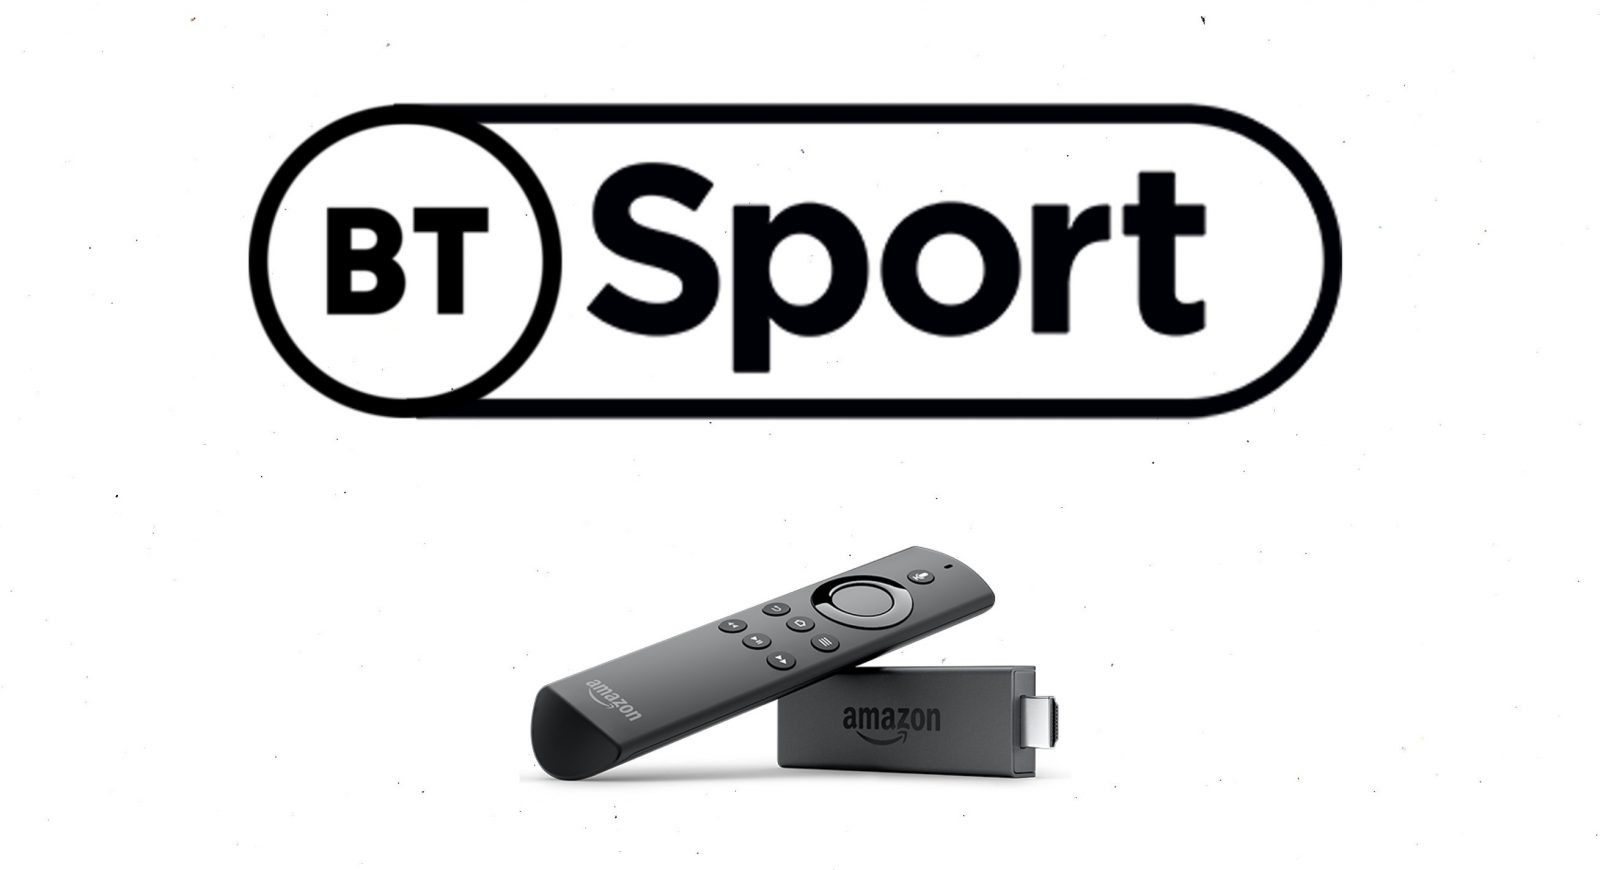 Bt Sport / More ways to watch BT Sport than ever with launch of app ... - Live sporting events on this tv platform.